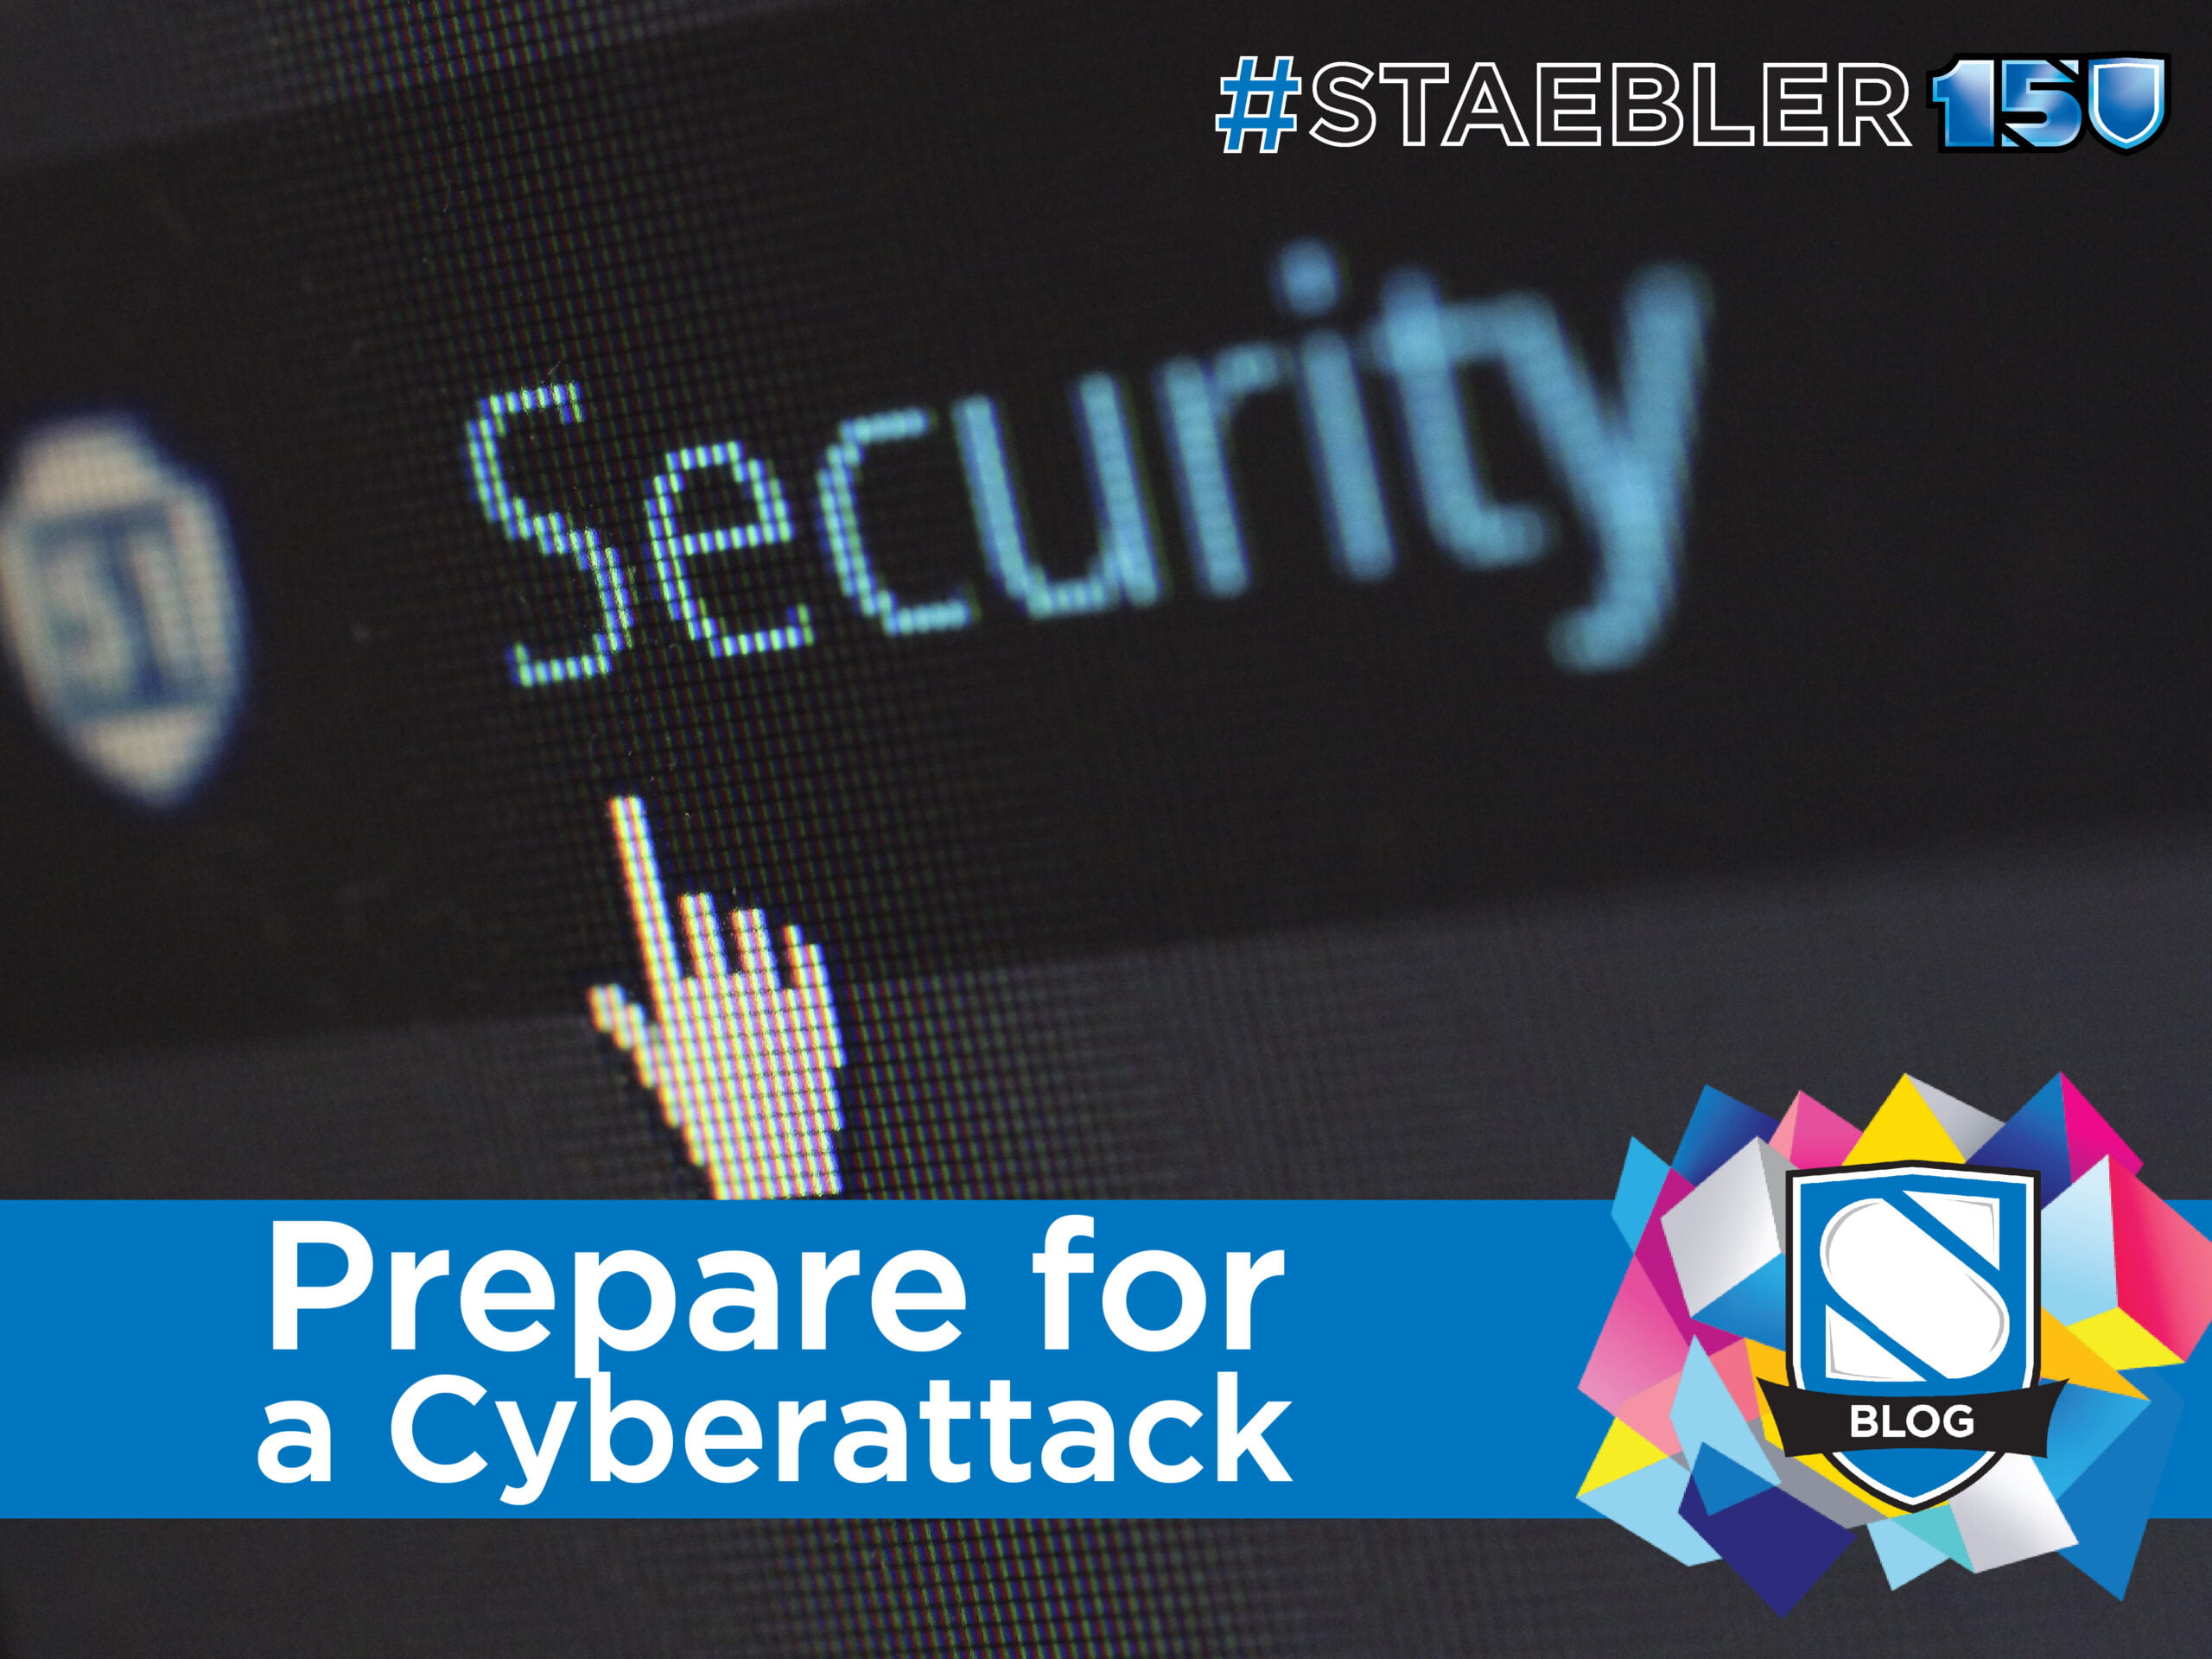 How to Prepare for a Cyberattack